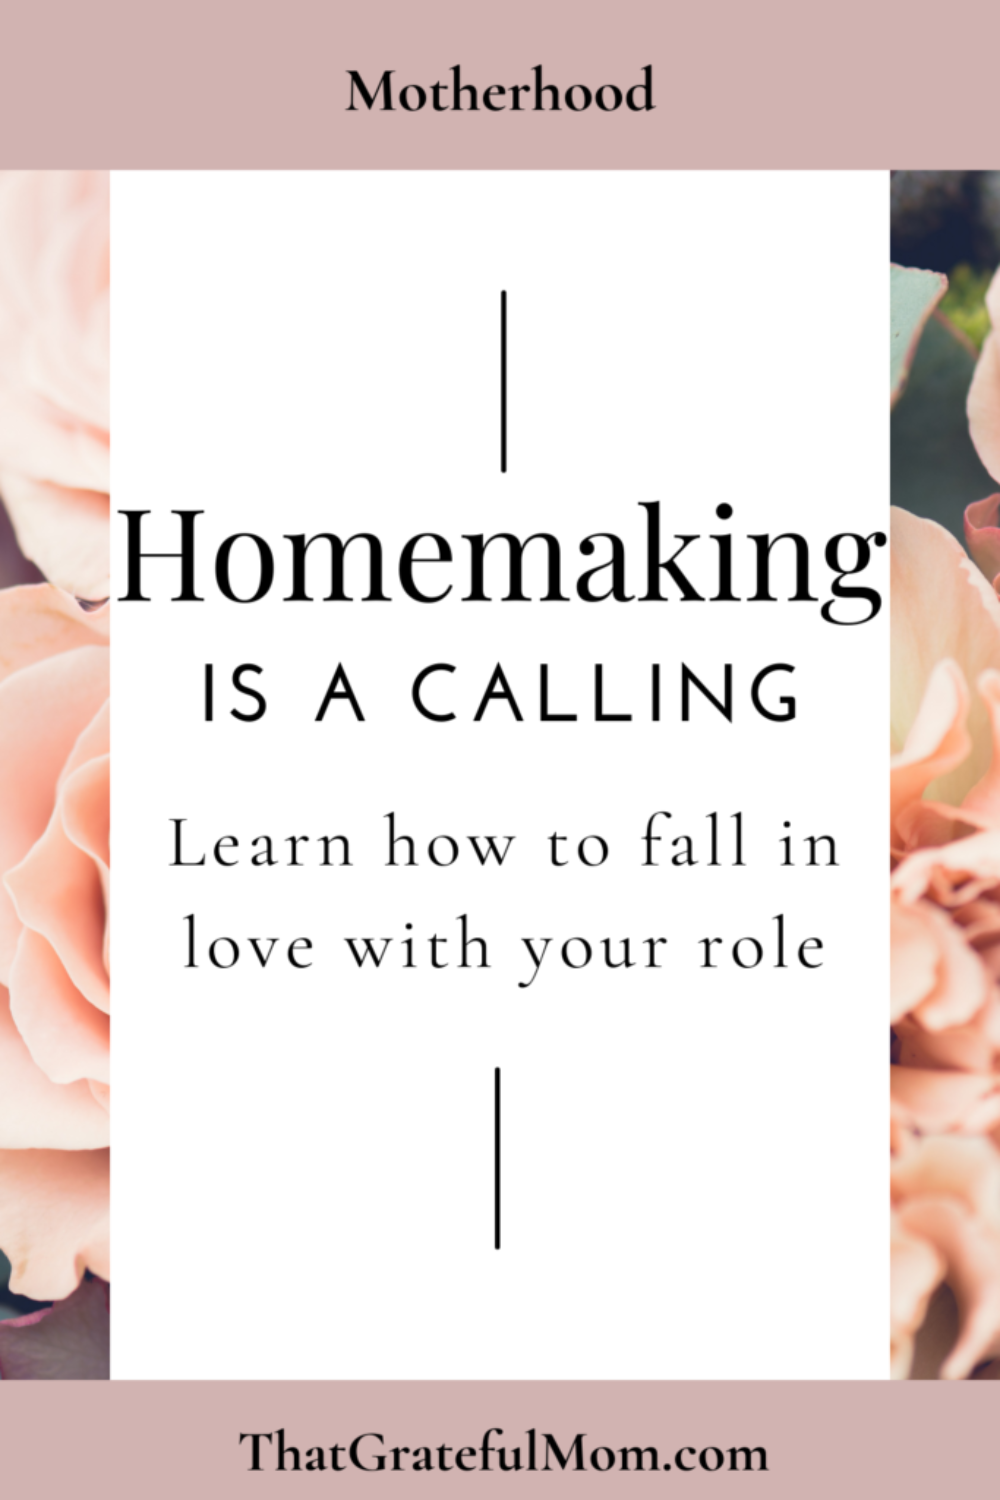 How to fall in love with homemaking